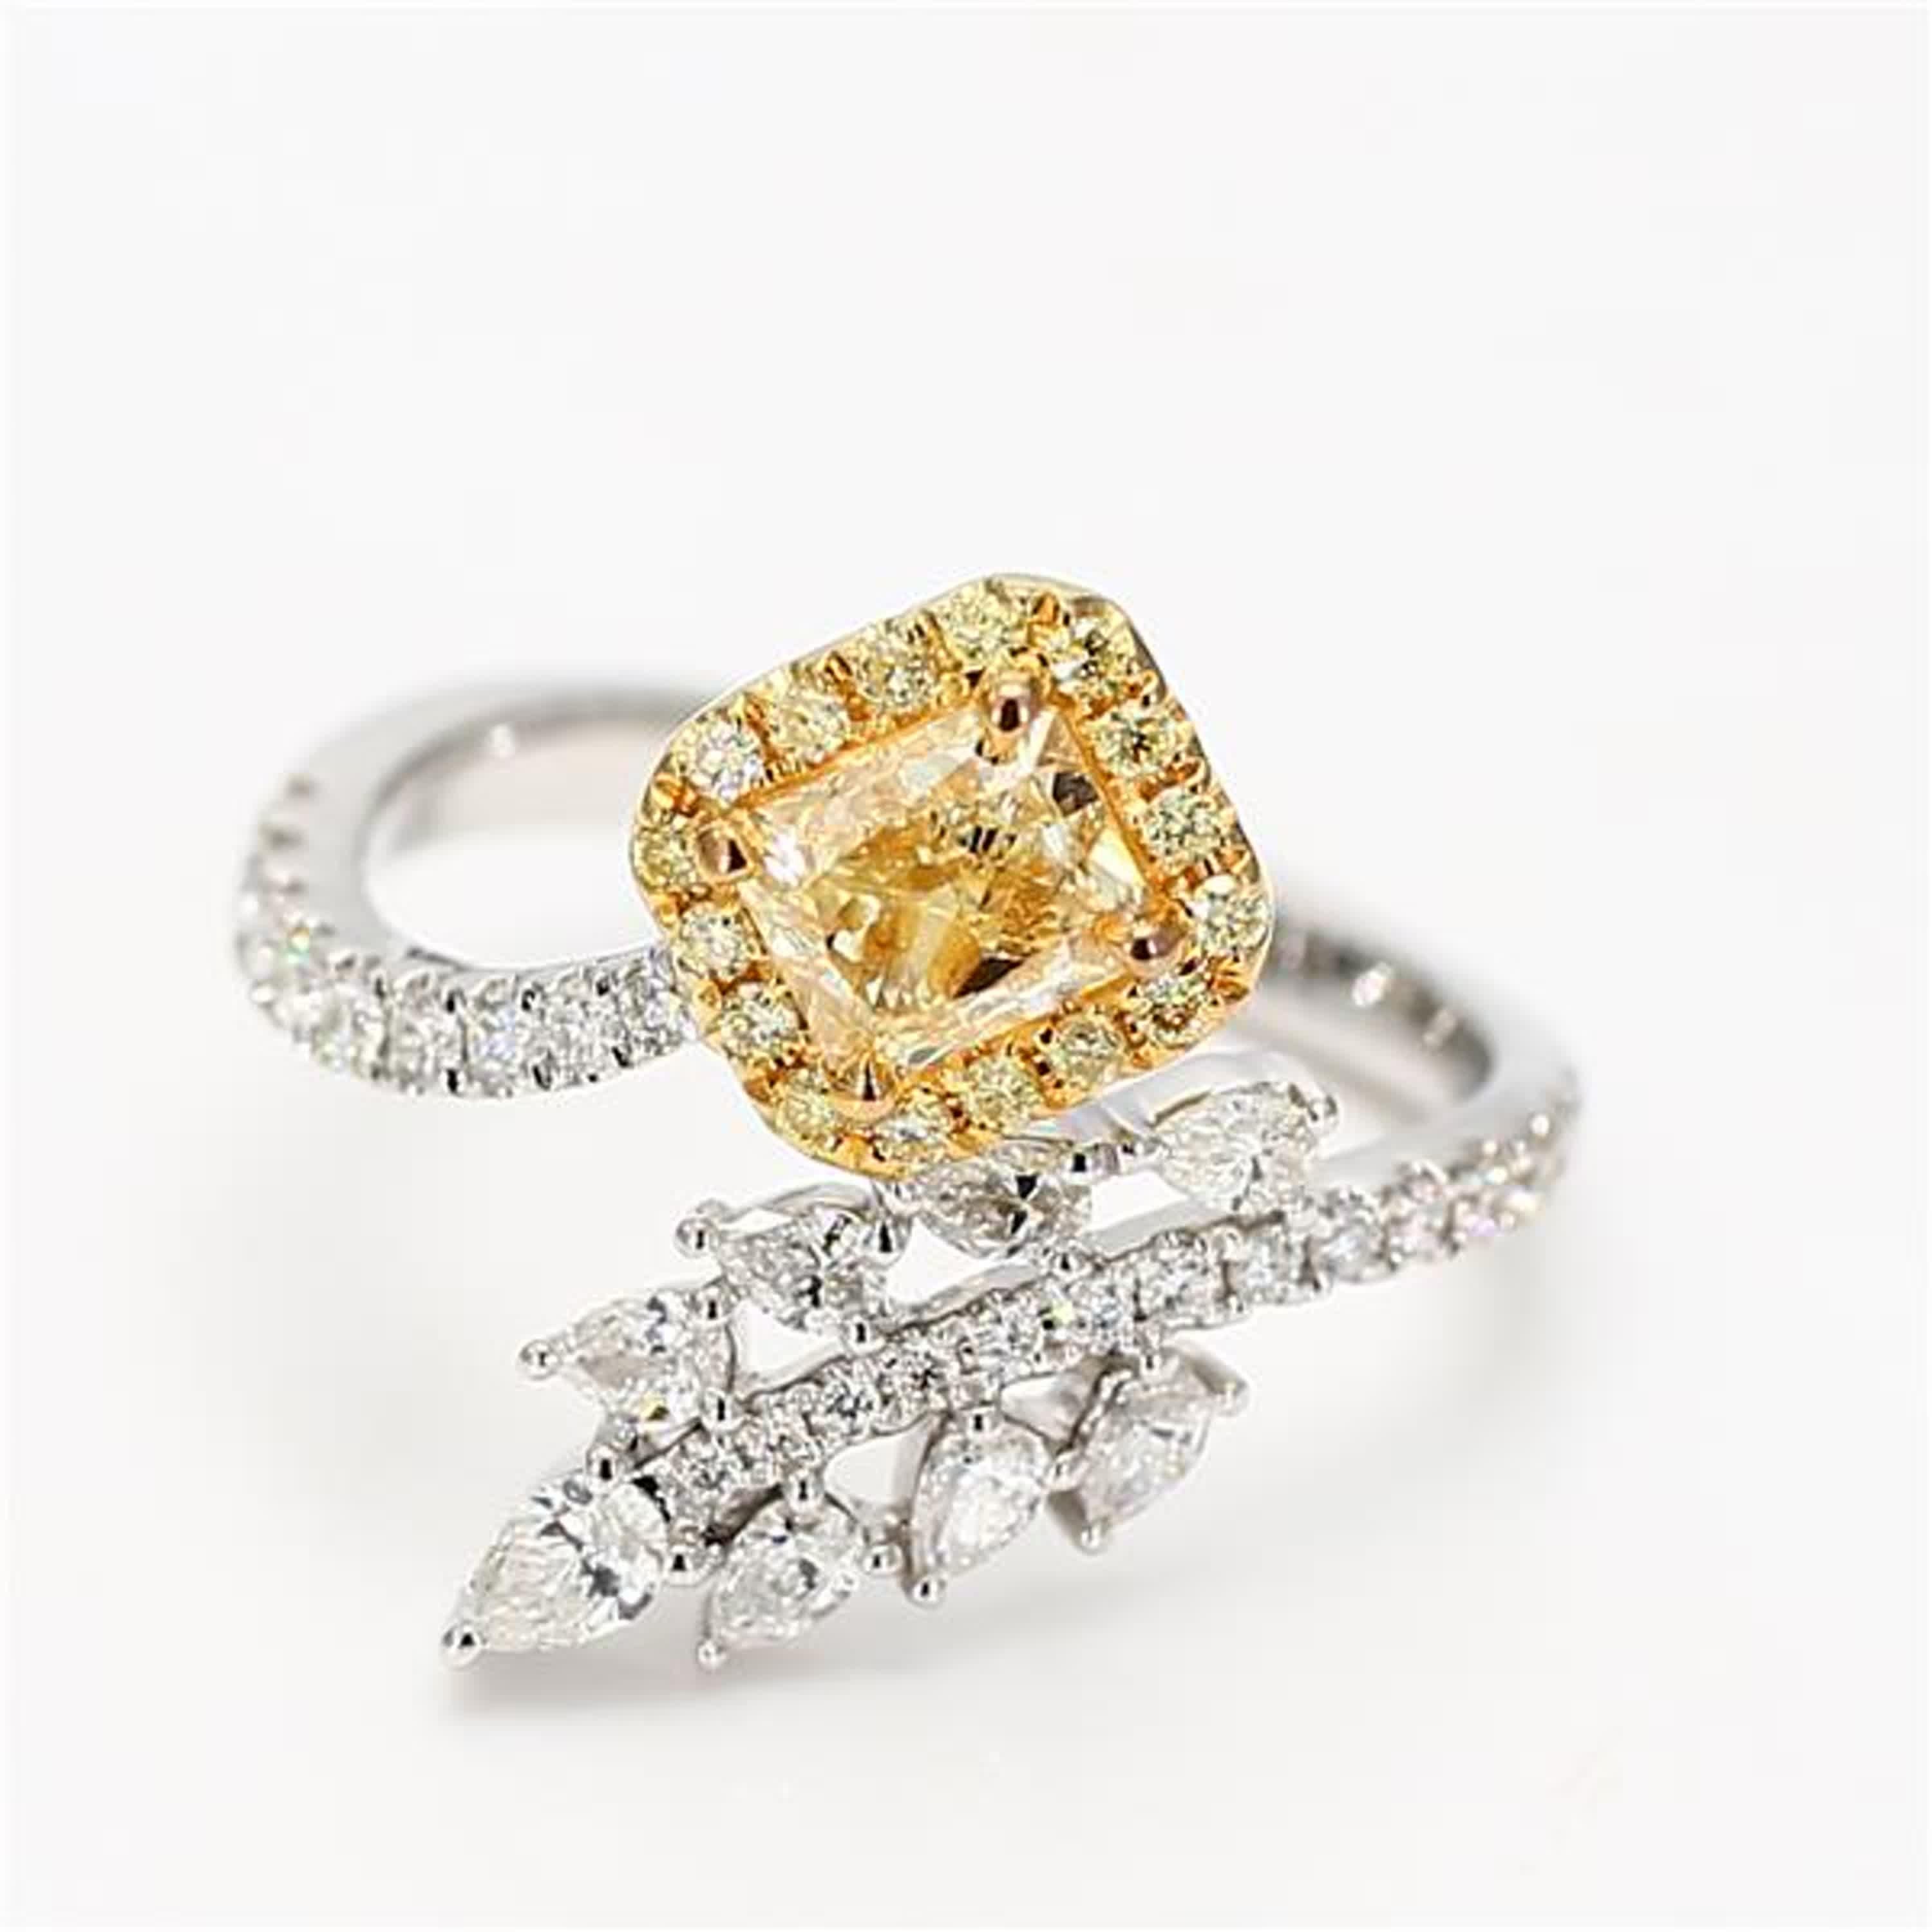 Contemporary GIA Certified Natural Yellow Radiant Diamond 1.78 Carat TW Gold Cocktail Ring